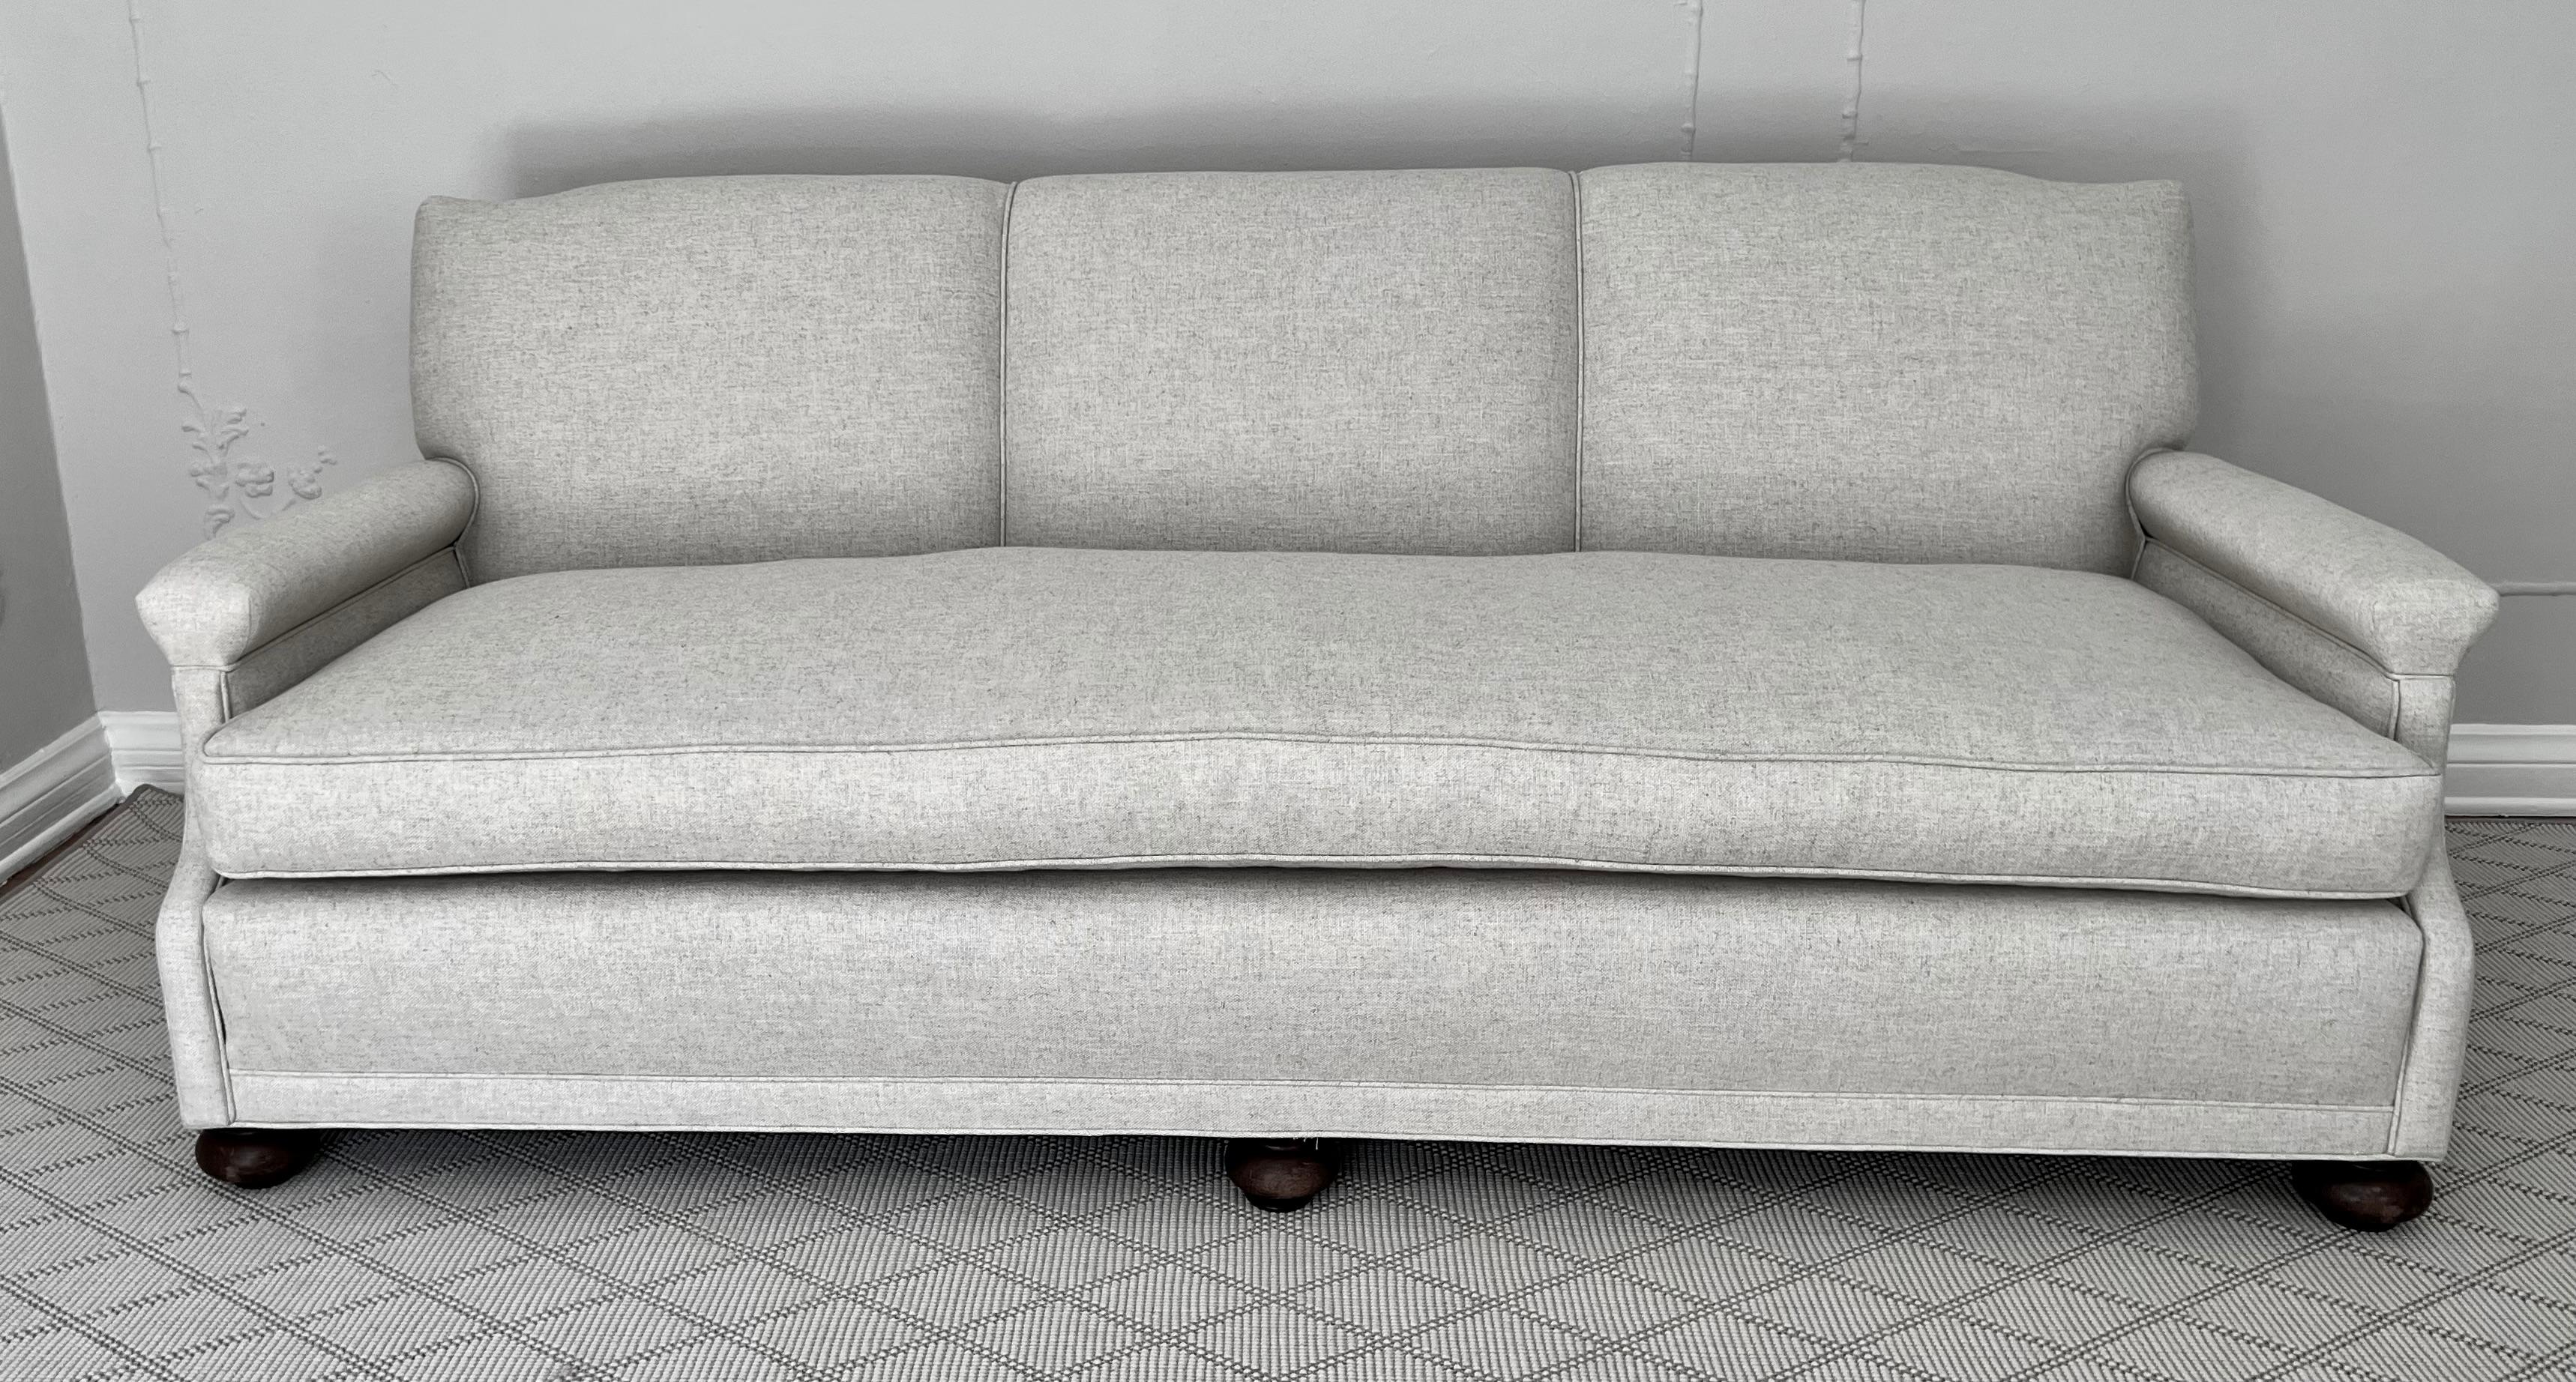 Mid-Century Modern Sofa in Linen and Down Upholstery and Bun Feet For Sale